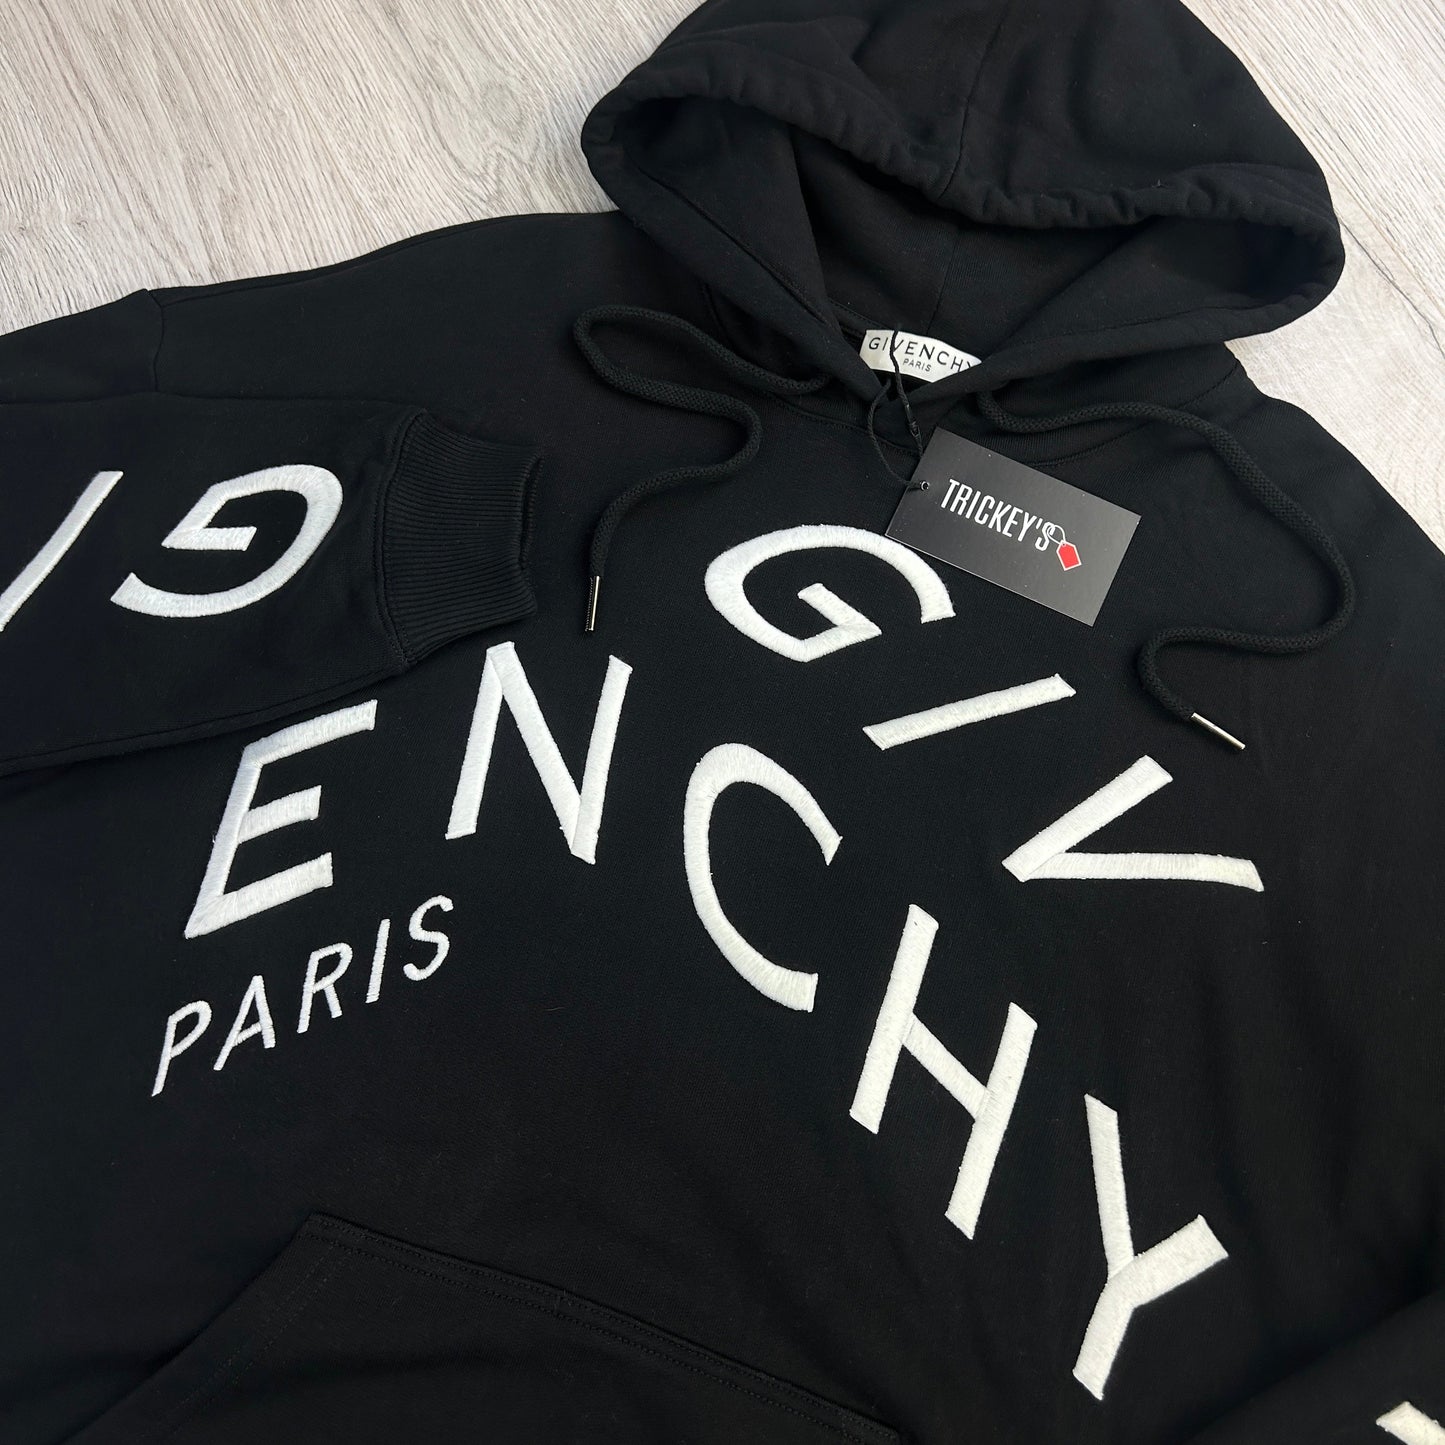 Givenchy Men’s Black Pullover Hoodie Refracted Embroidered - Small